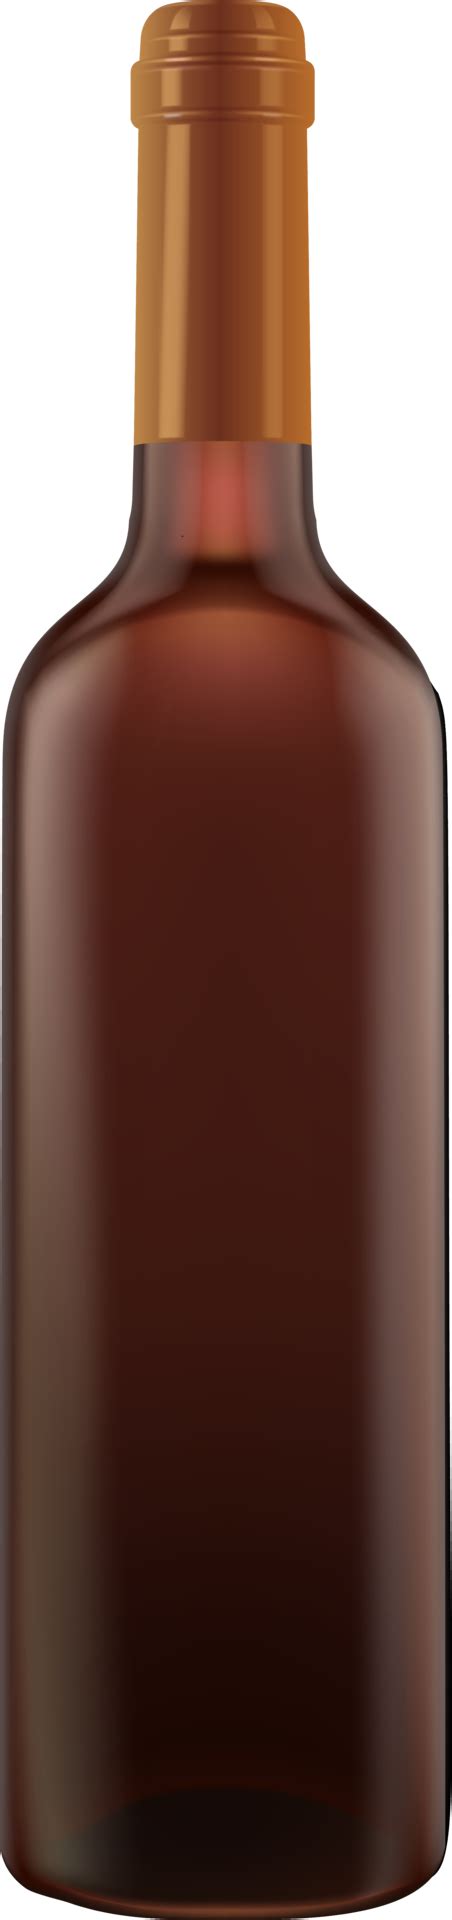 Brown Glass Wine Bottle 11835000 Png